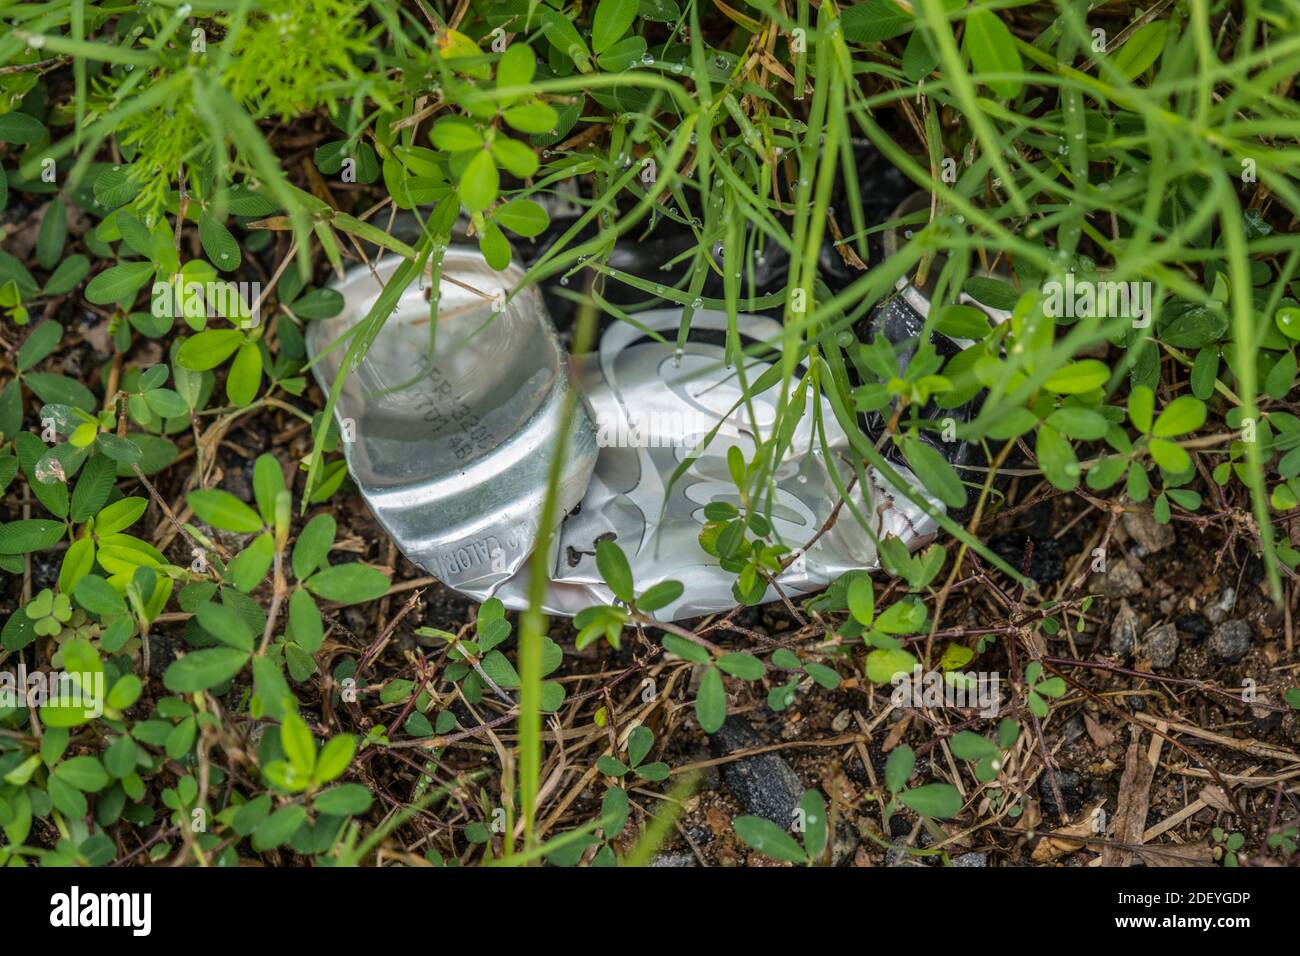 Crushed and discarded carelessly on the ground laying underneath the weeds outdoors polluting the environment Stock Photo